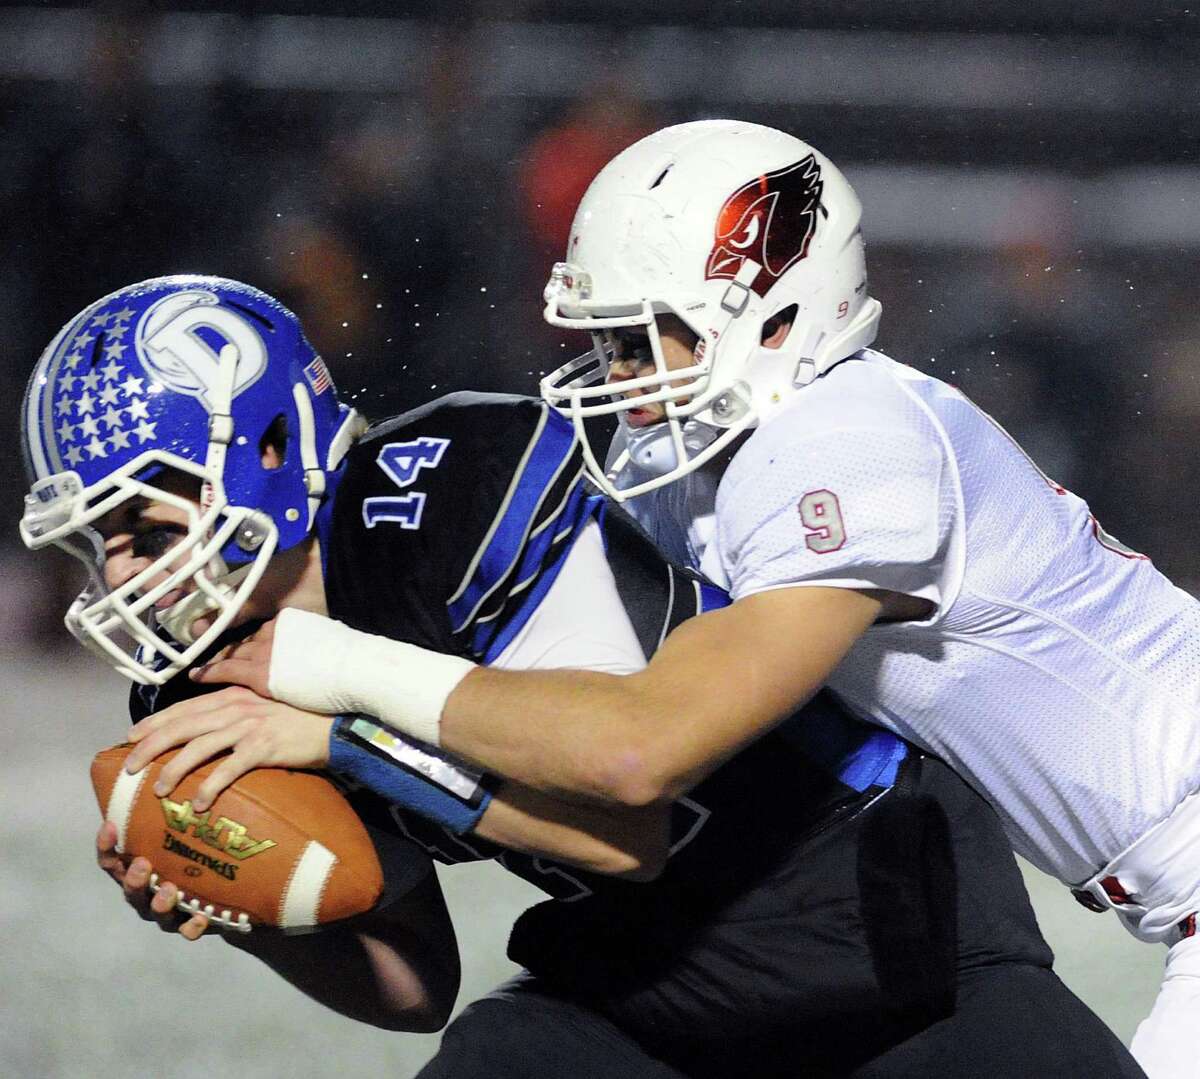 At left, Darien quarterback Brian Peters (14) is sacked by Ian Pearson (9) of Greenwich during the Class LL playoff game between Greenwich and Darien at Stamford High School on Nov. 29.